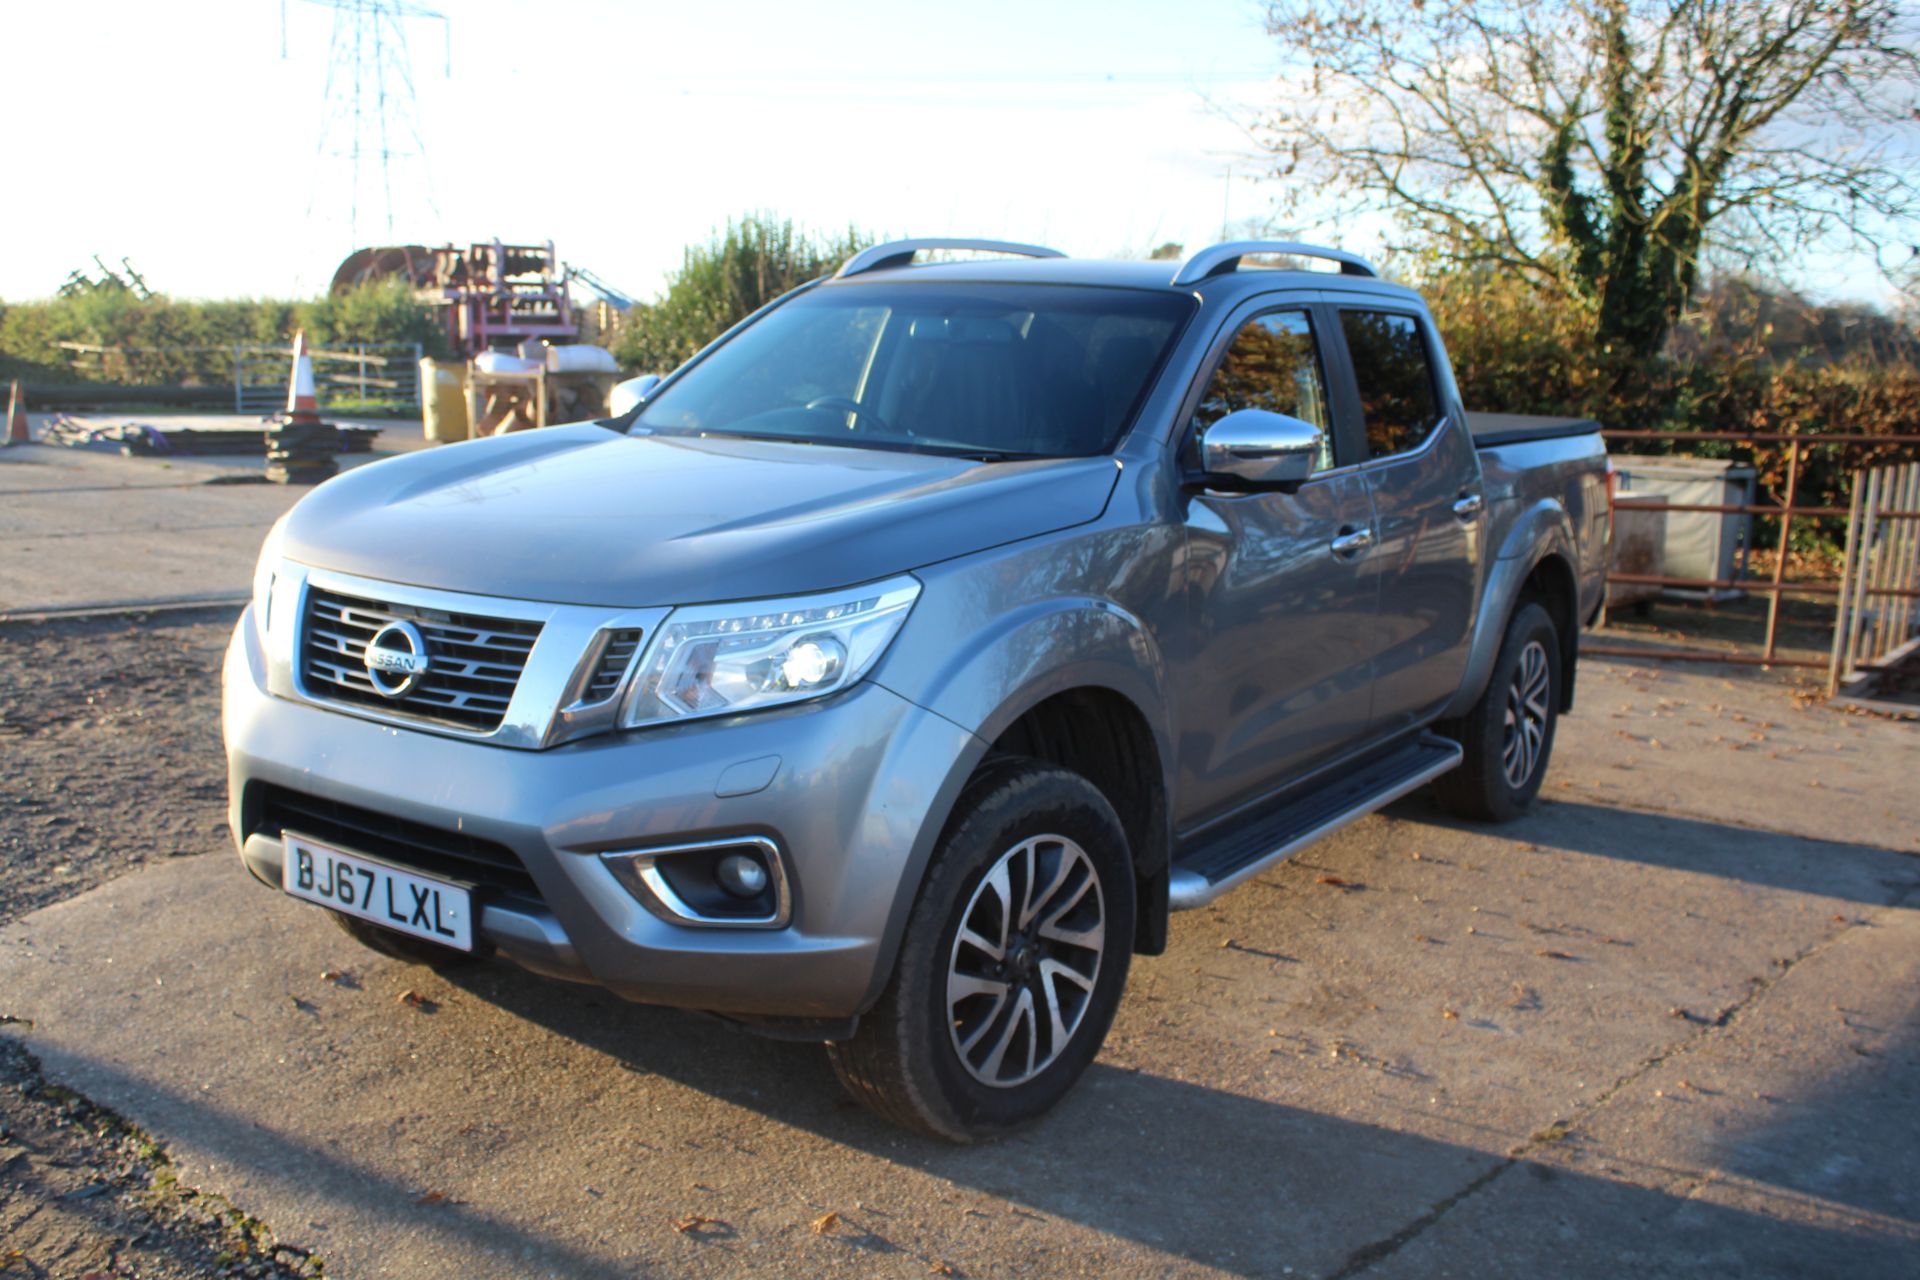 Nissan Navara NP300 Tecna auto double-cab pick-up. Registration BJ67 LXL. Date of first registration - Image 2 of 78